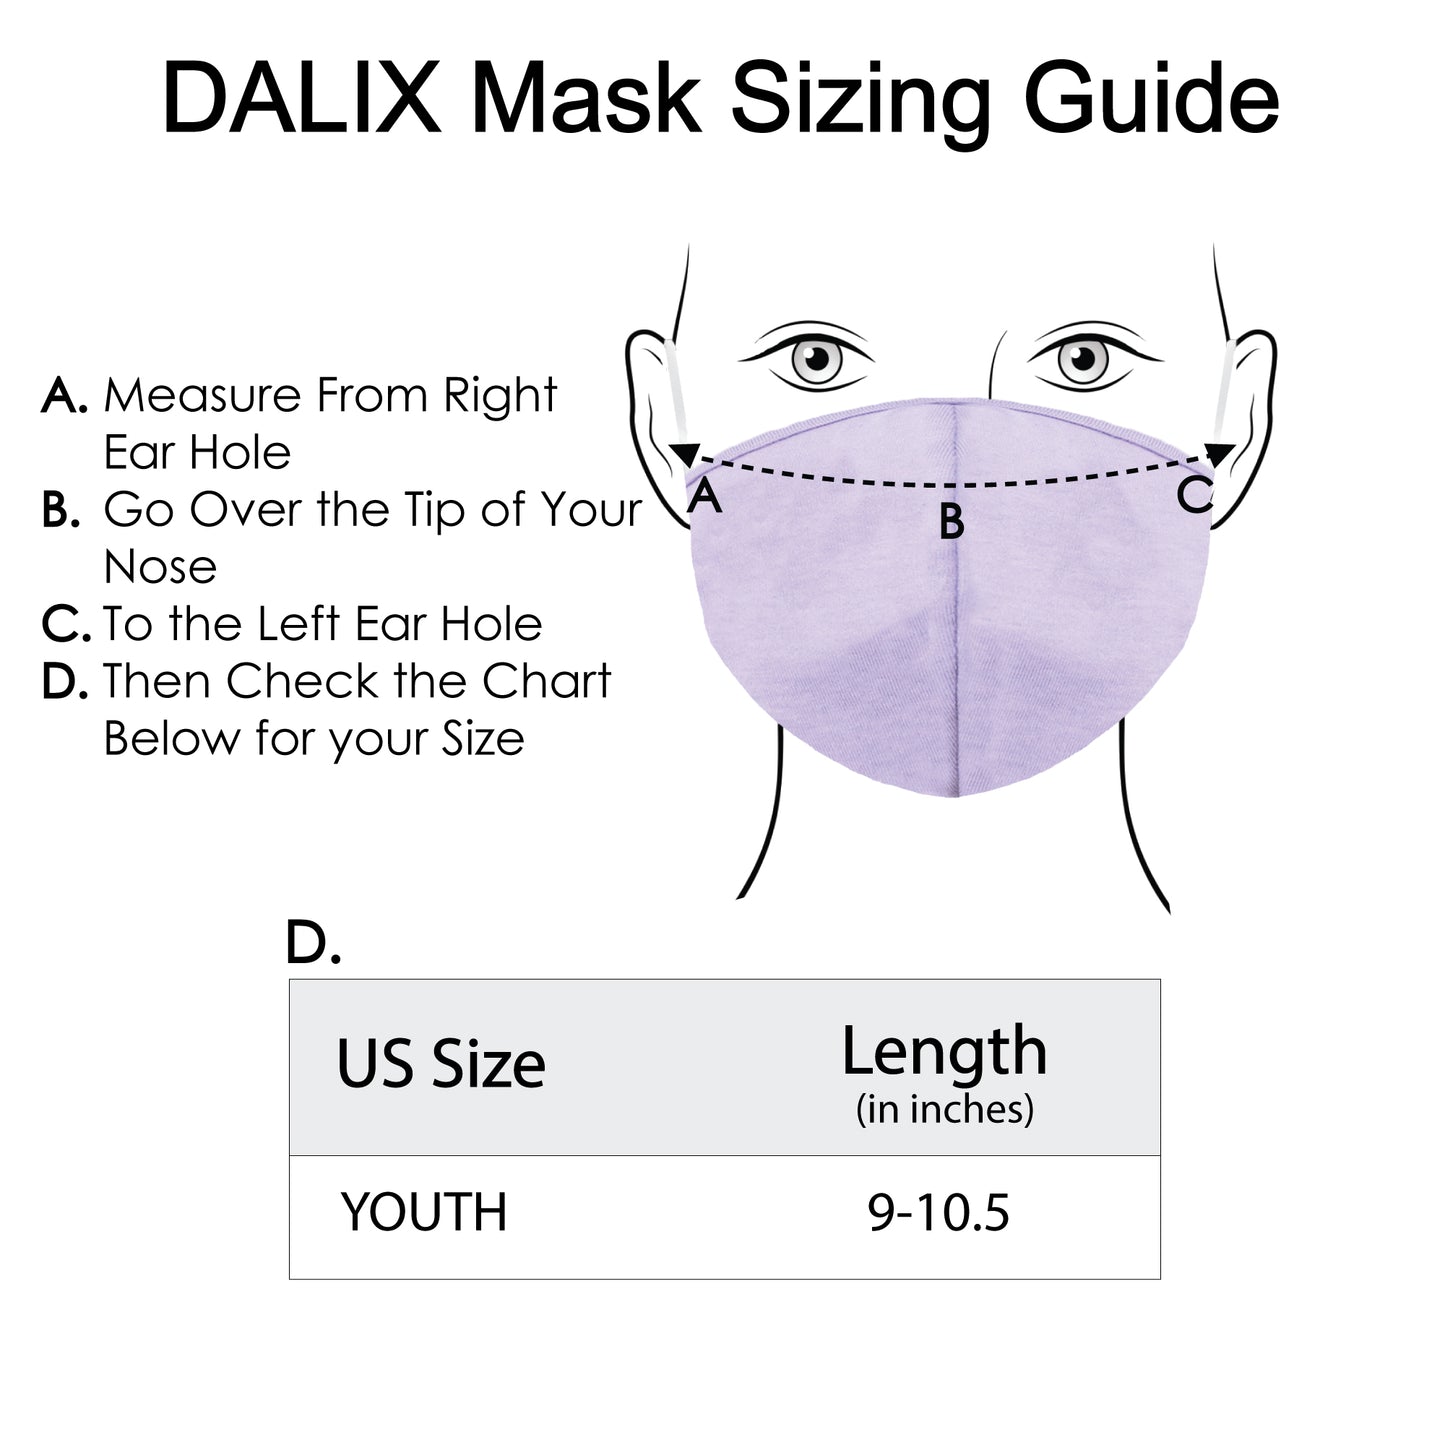 Dalix Kids Cotton Face Mask Reuseable Washable Made in USA - XXS-XS Size 5 Pack